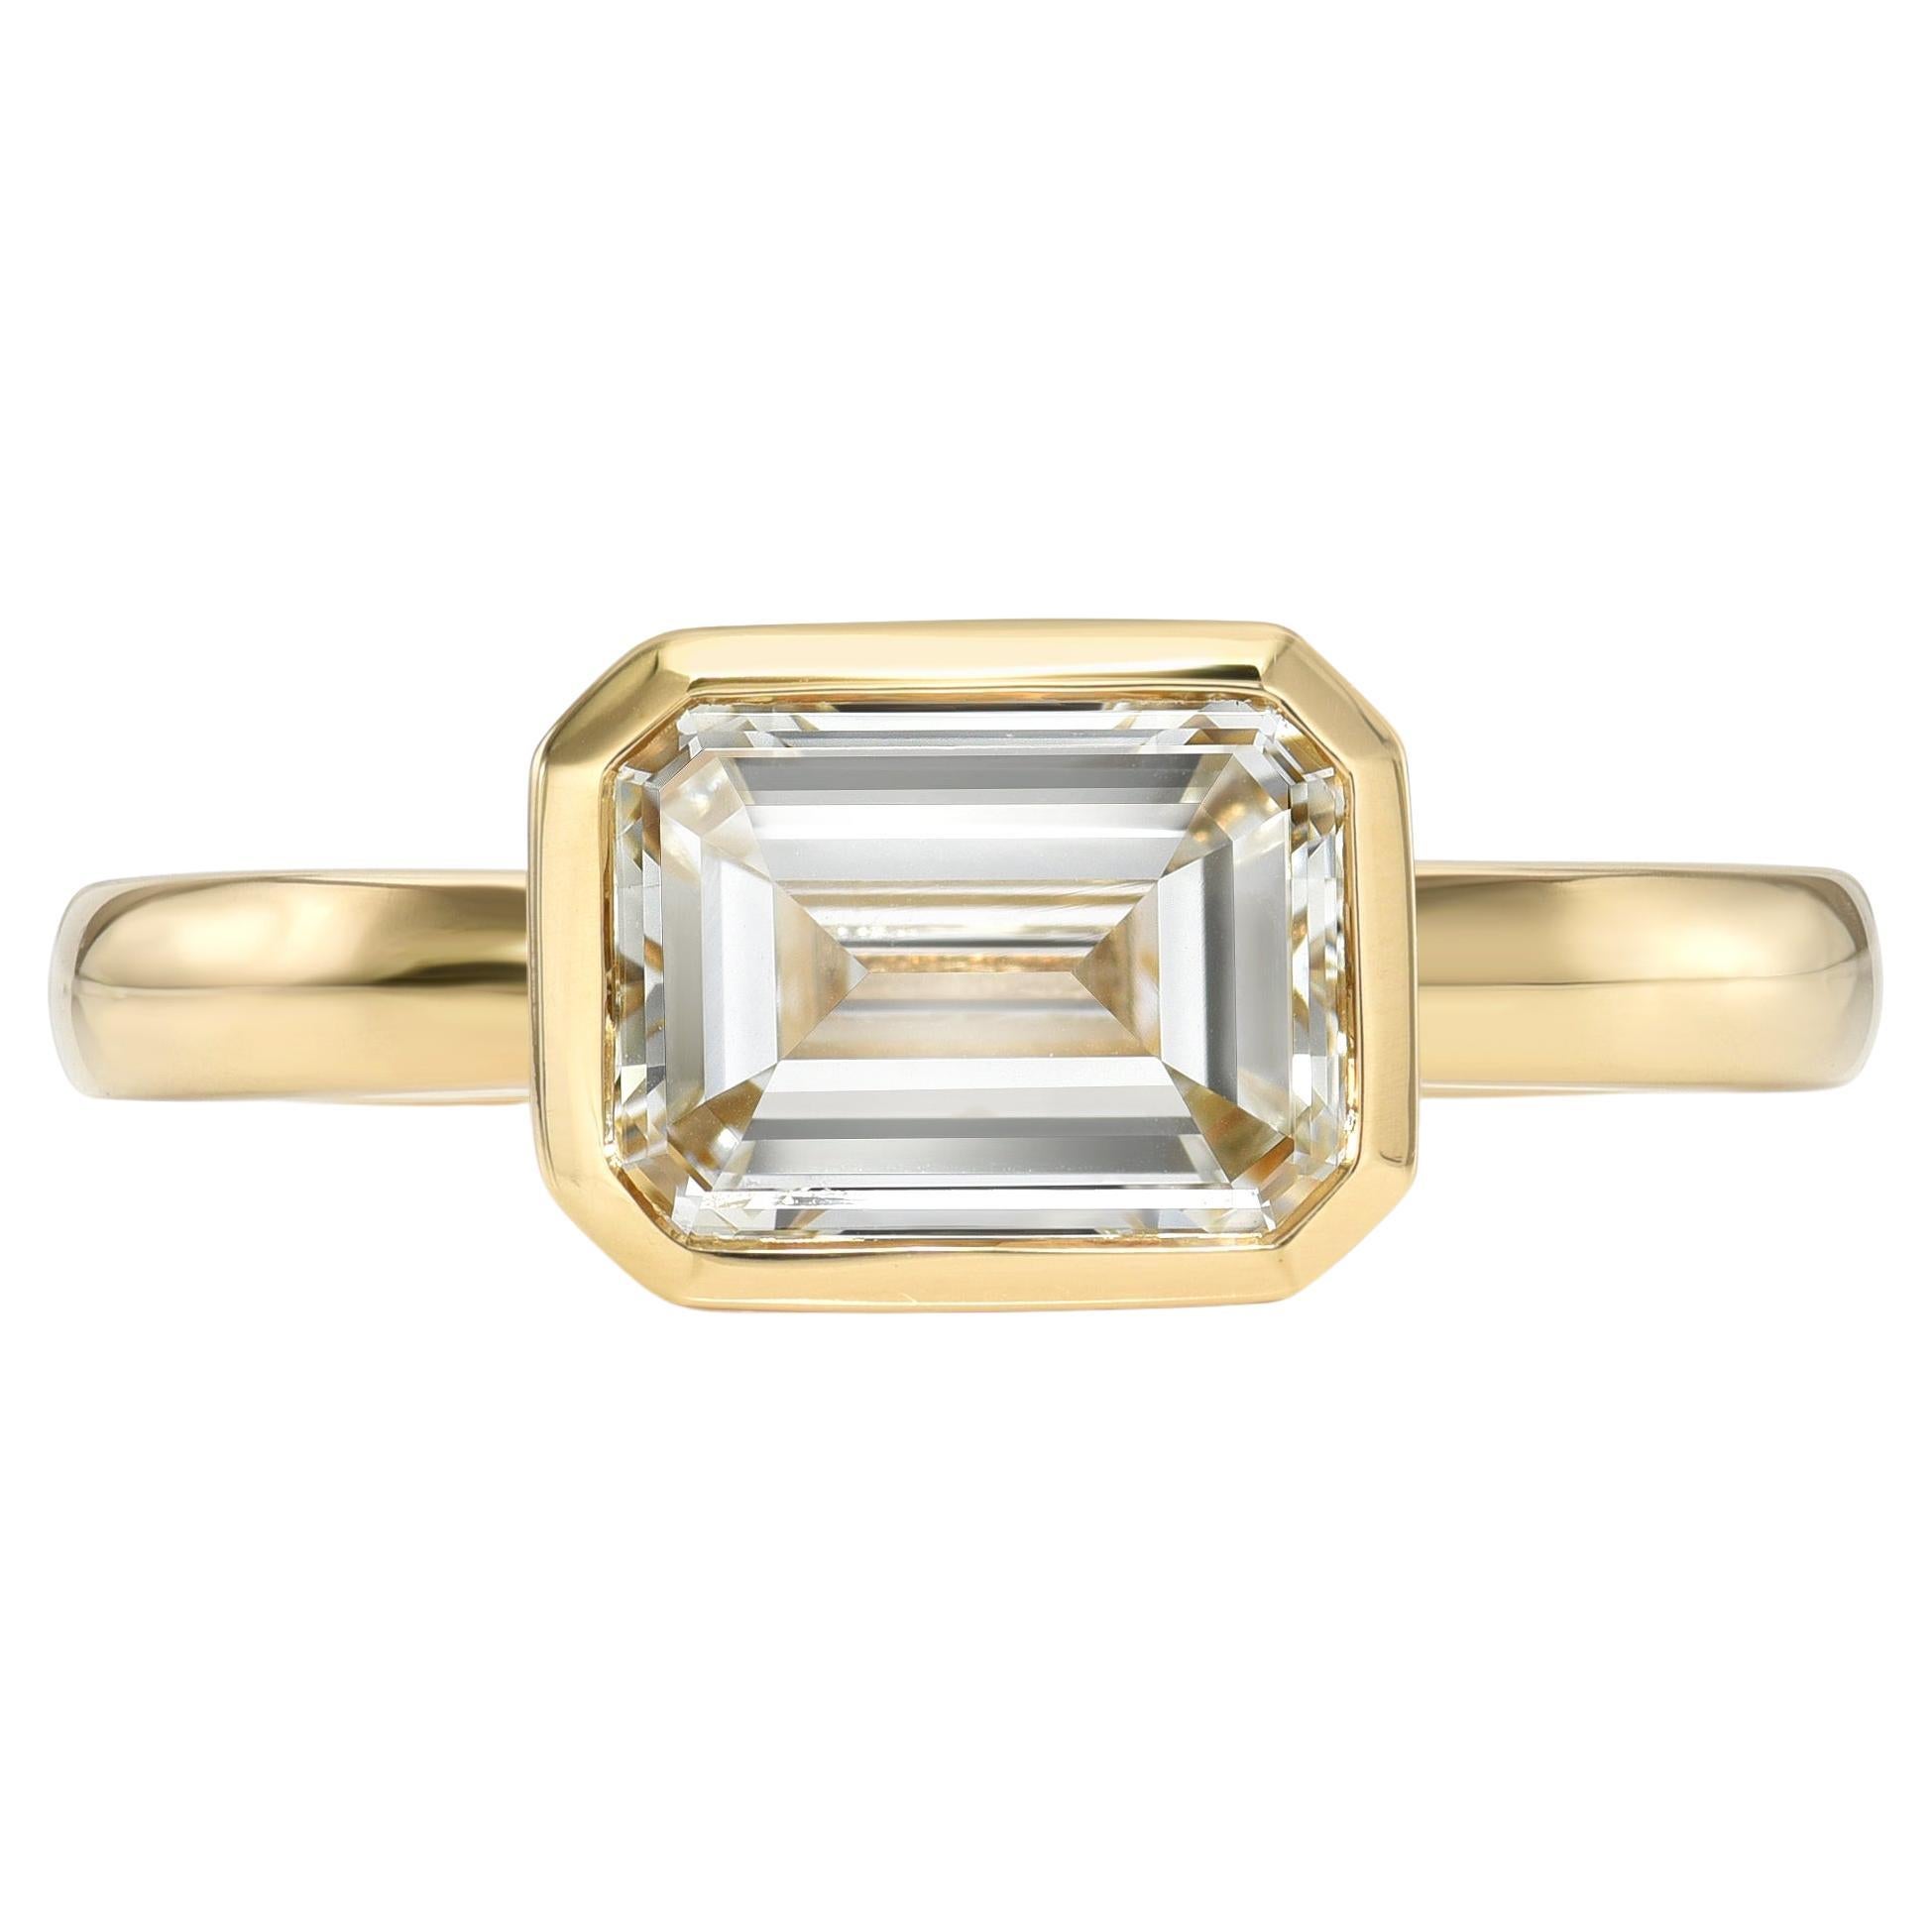 Handcrafted Leah Emerald Cut Diamond Ring by Single Stone For Sale